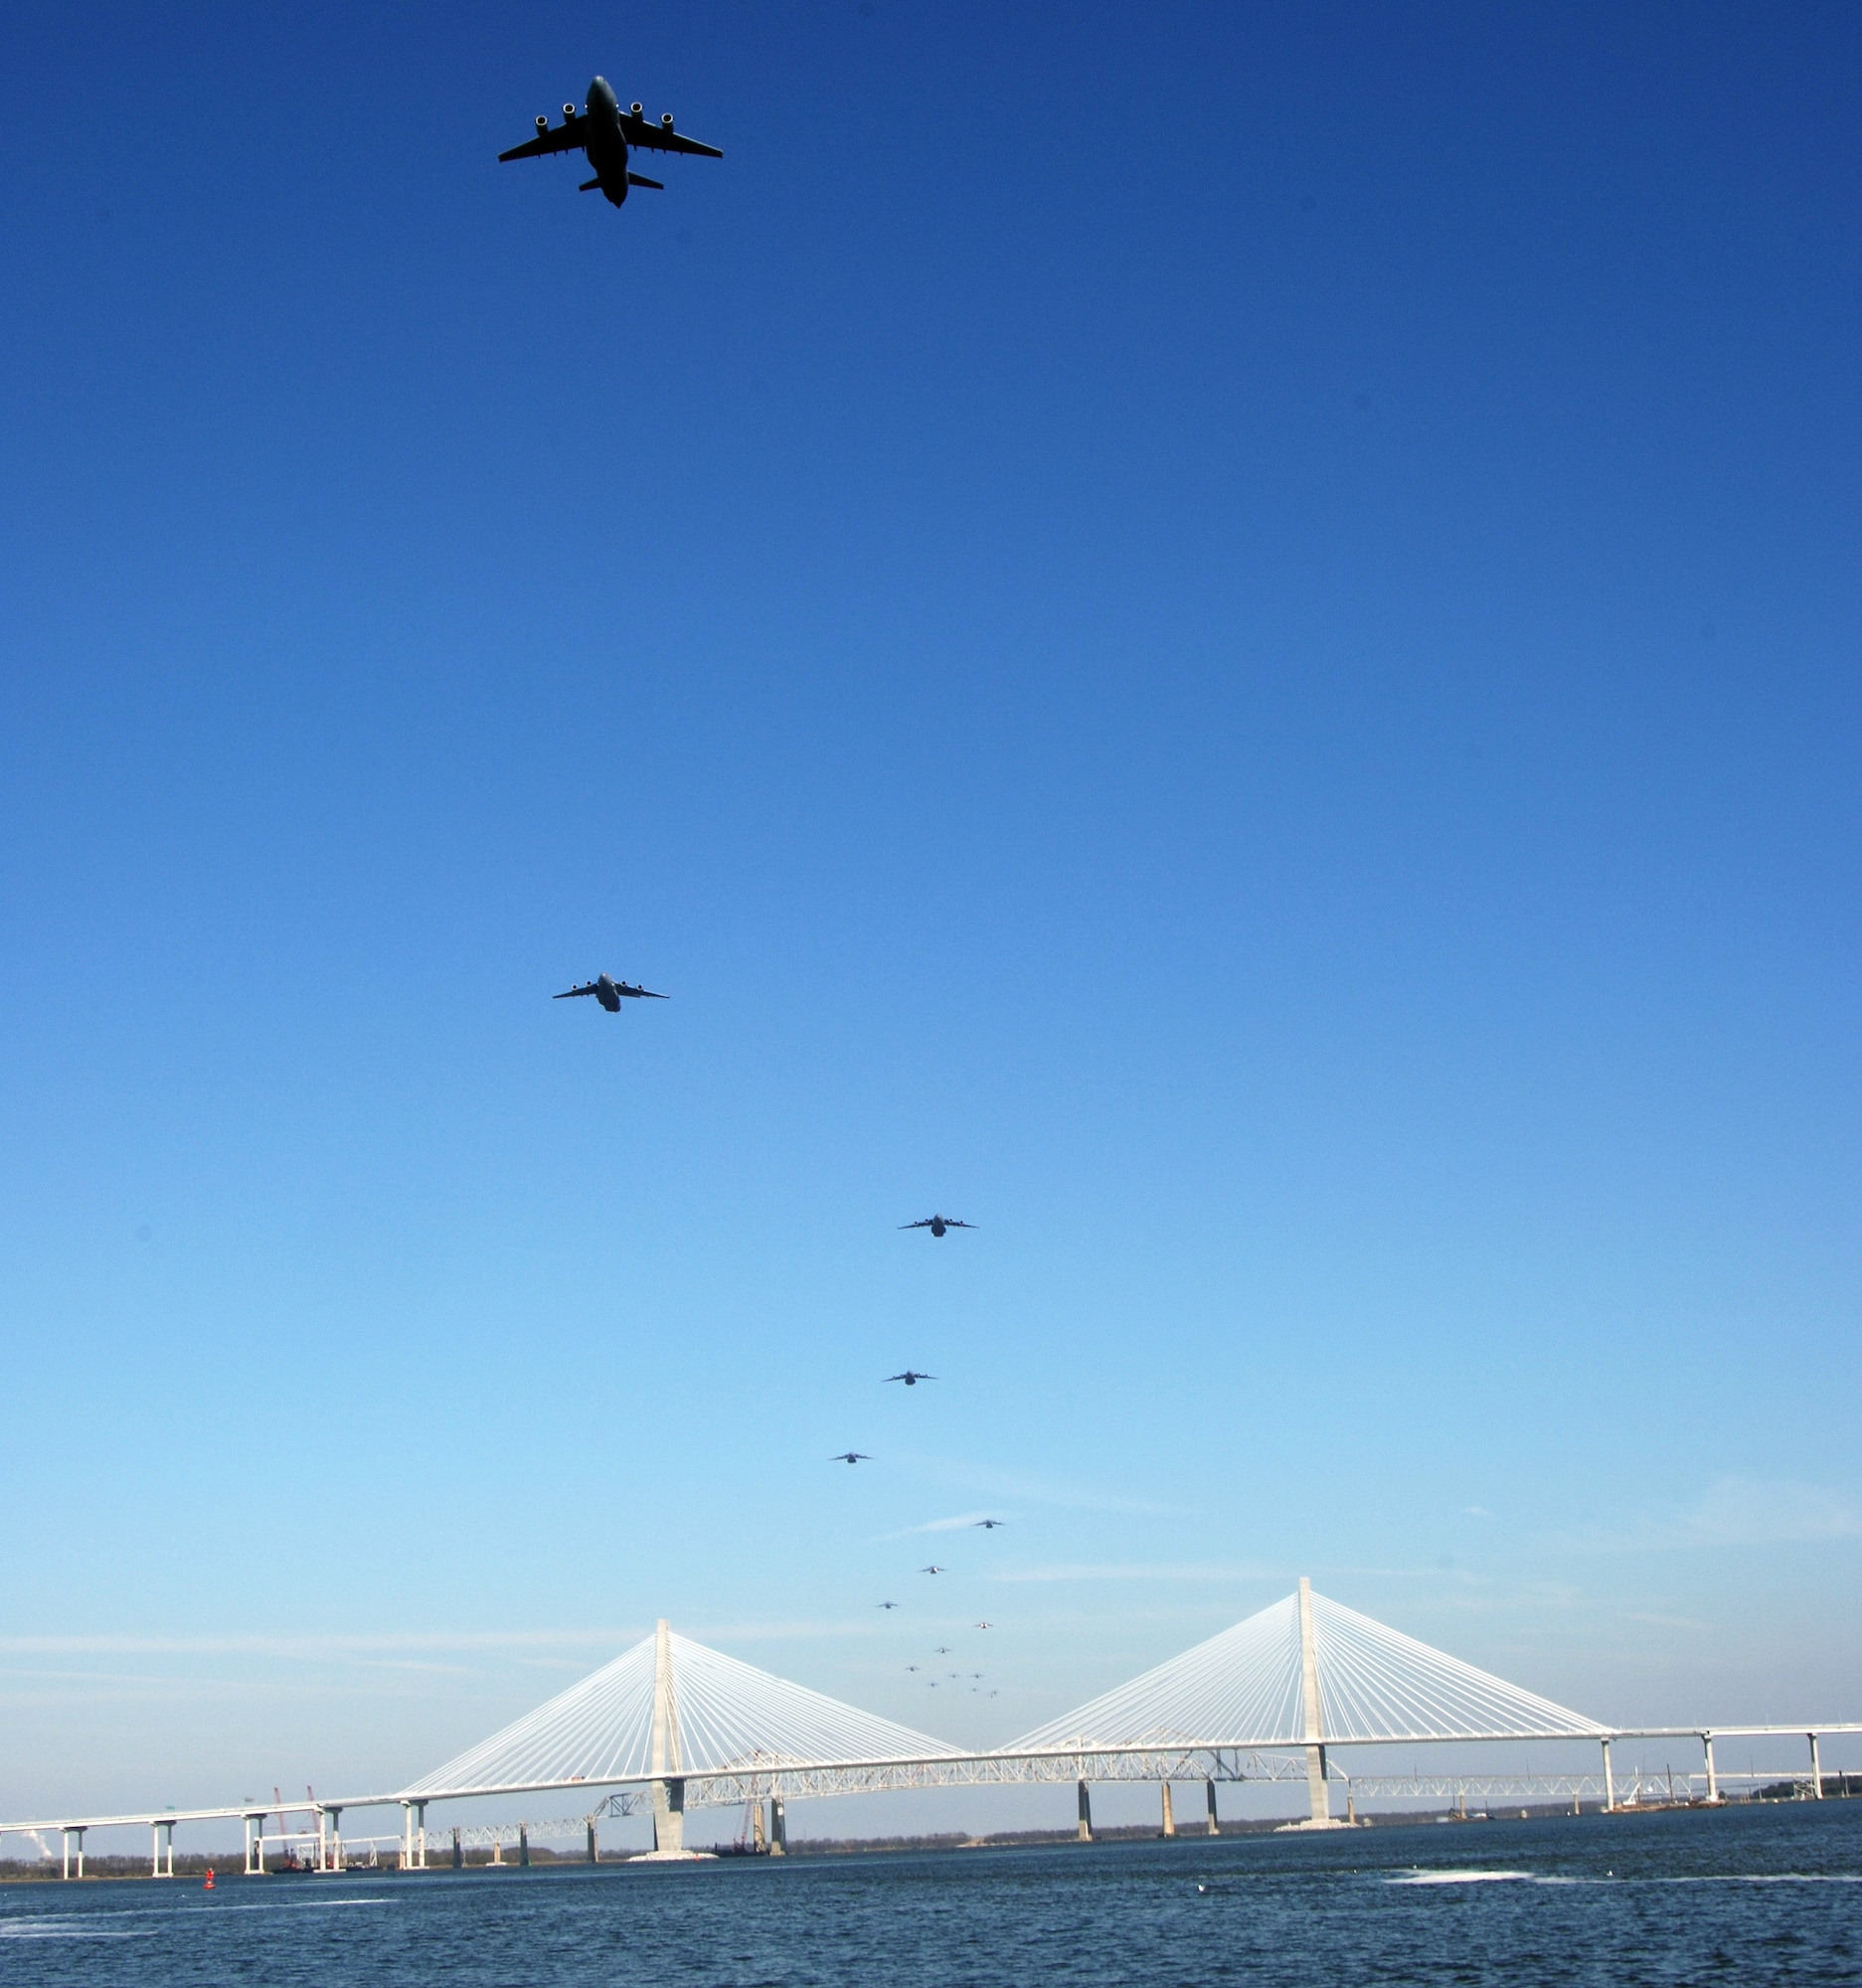 CHARLESTON, S.C. (AFPN) -- A formation of 17 C-17 Globemaster IIIs assigned to the 437th and 315th Airlift Wings at Charleston Air Force Base fly in formation today.  The flight, which demonstrates the U.S. Air Force's strategic capability, is the largest formation of C-17s to take flight from a single base.  (U.S. Air Force photo by Tech. Sgt. Richard T. Kaminsky)
